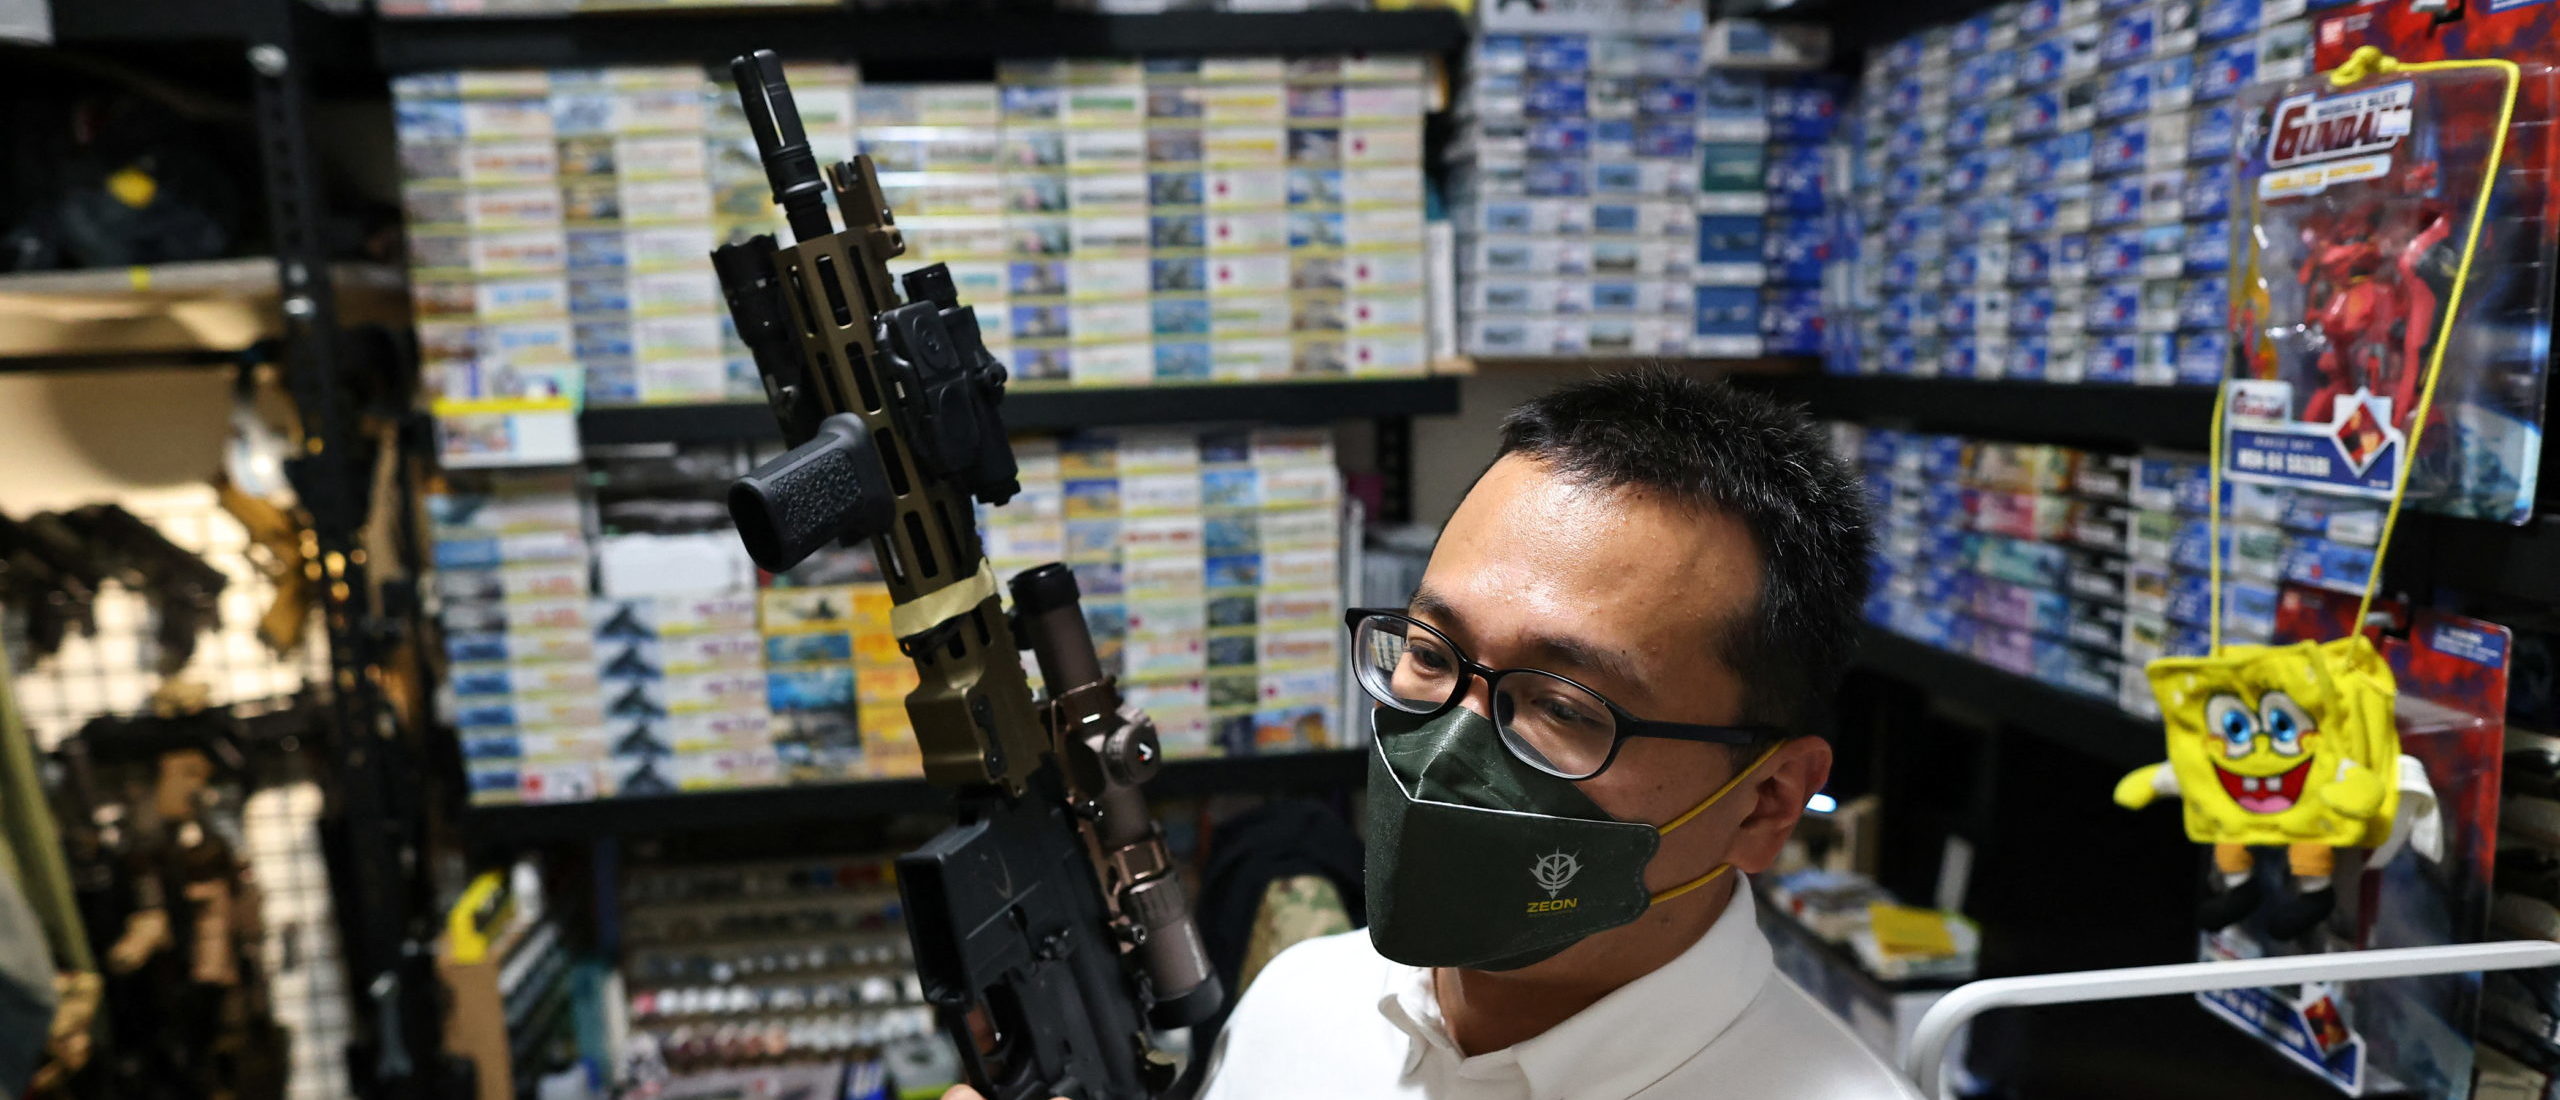 Lin Ping-yu, 38, a politician for the ruling Democratic Progressive Party who is competing for a seat in the local council, displays of one of his 12 airsoft guns at his home in New Taipei City, Taiwan, May 31,2022. Lin said the Ukraine war had prompted him to prepare survival kits for his family, complete with emergency food supplies and batteries, in case of the worst. (REUTERS/Ann Wang)